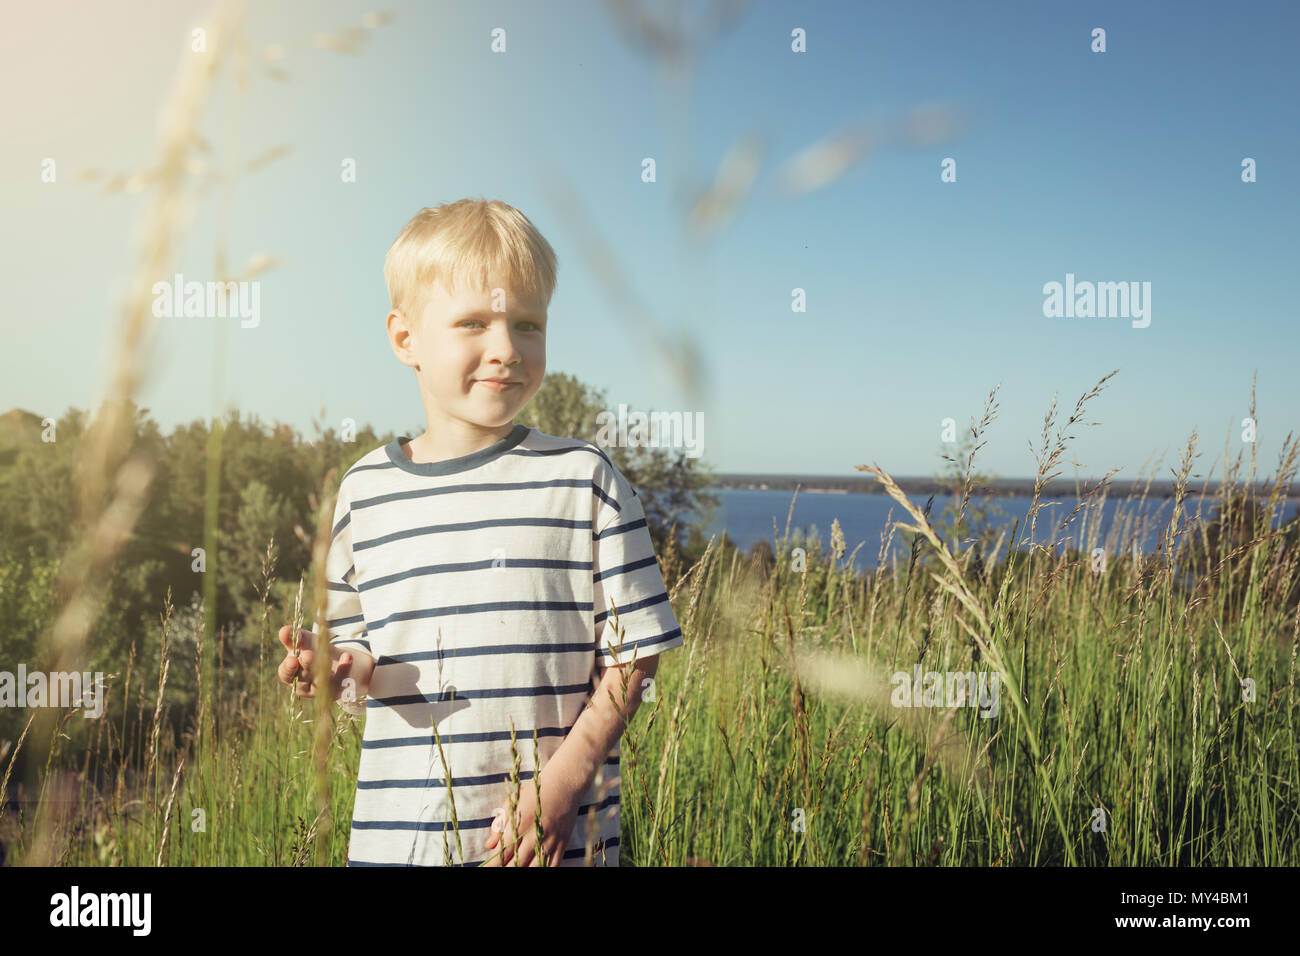 Little blond boy smiling and looking at camera on nature. Summer activity. Field with high grass. Stock Photo